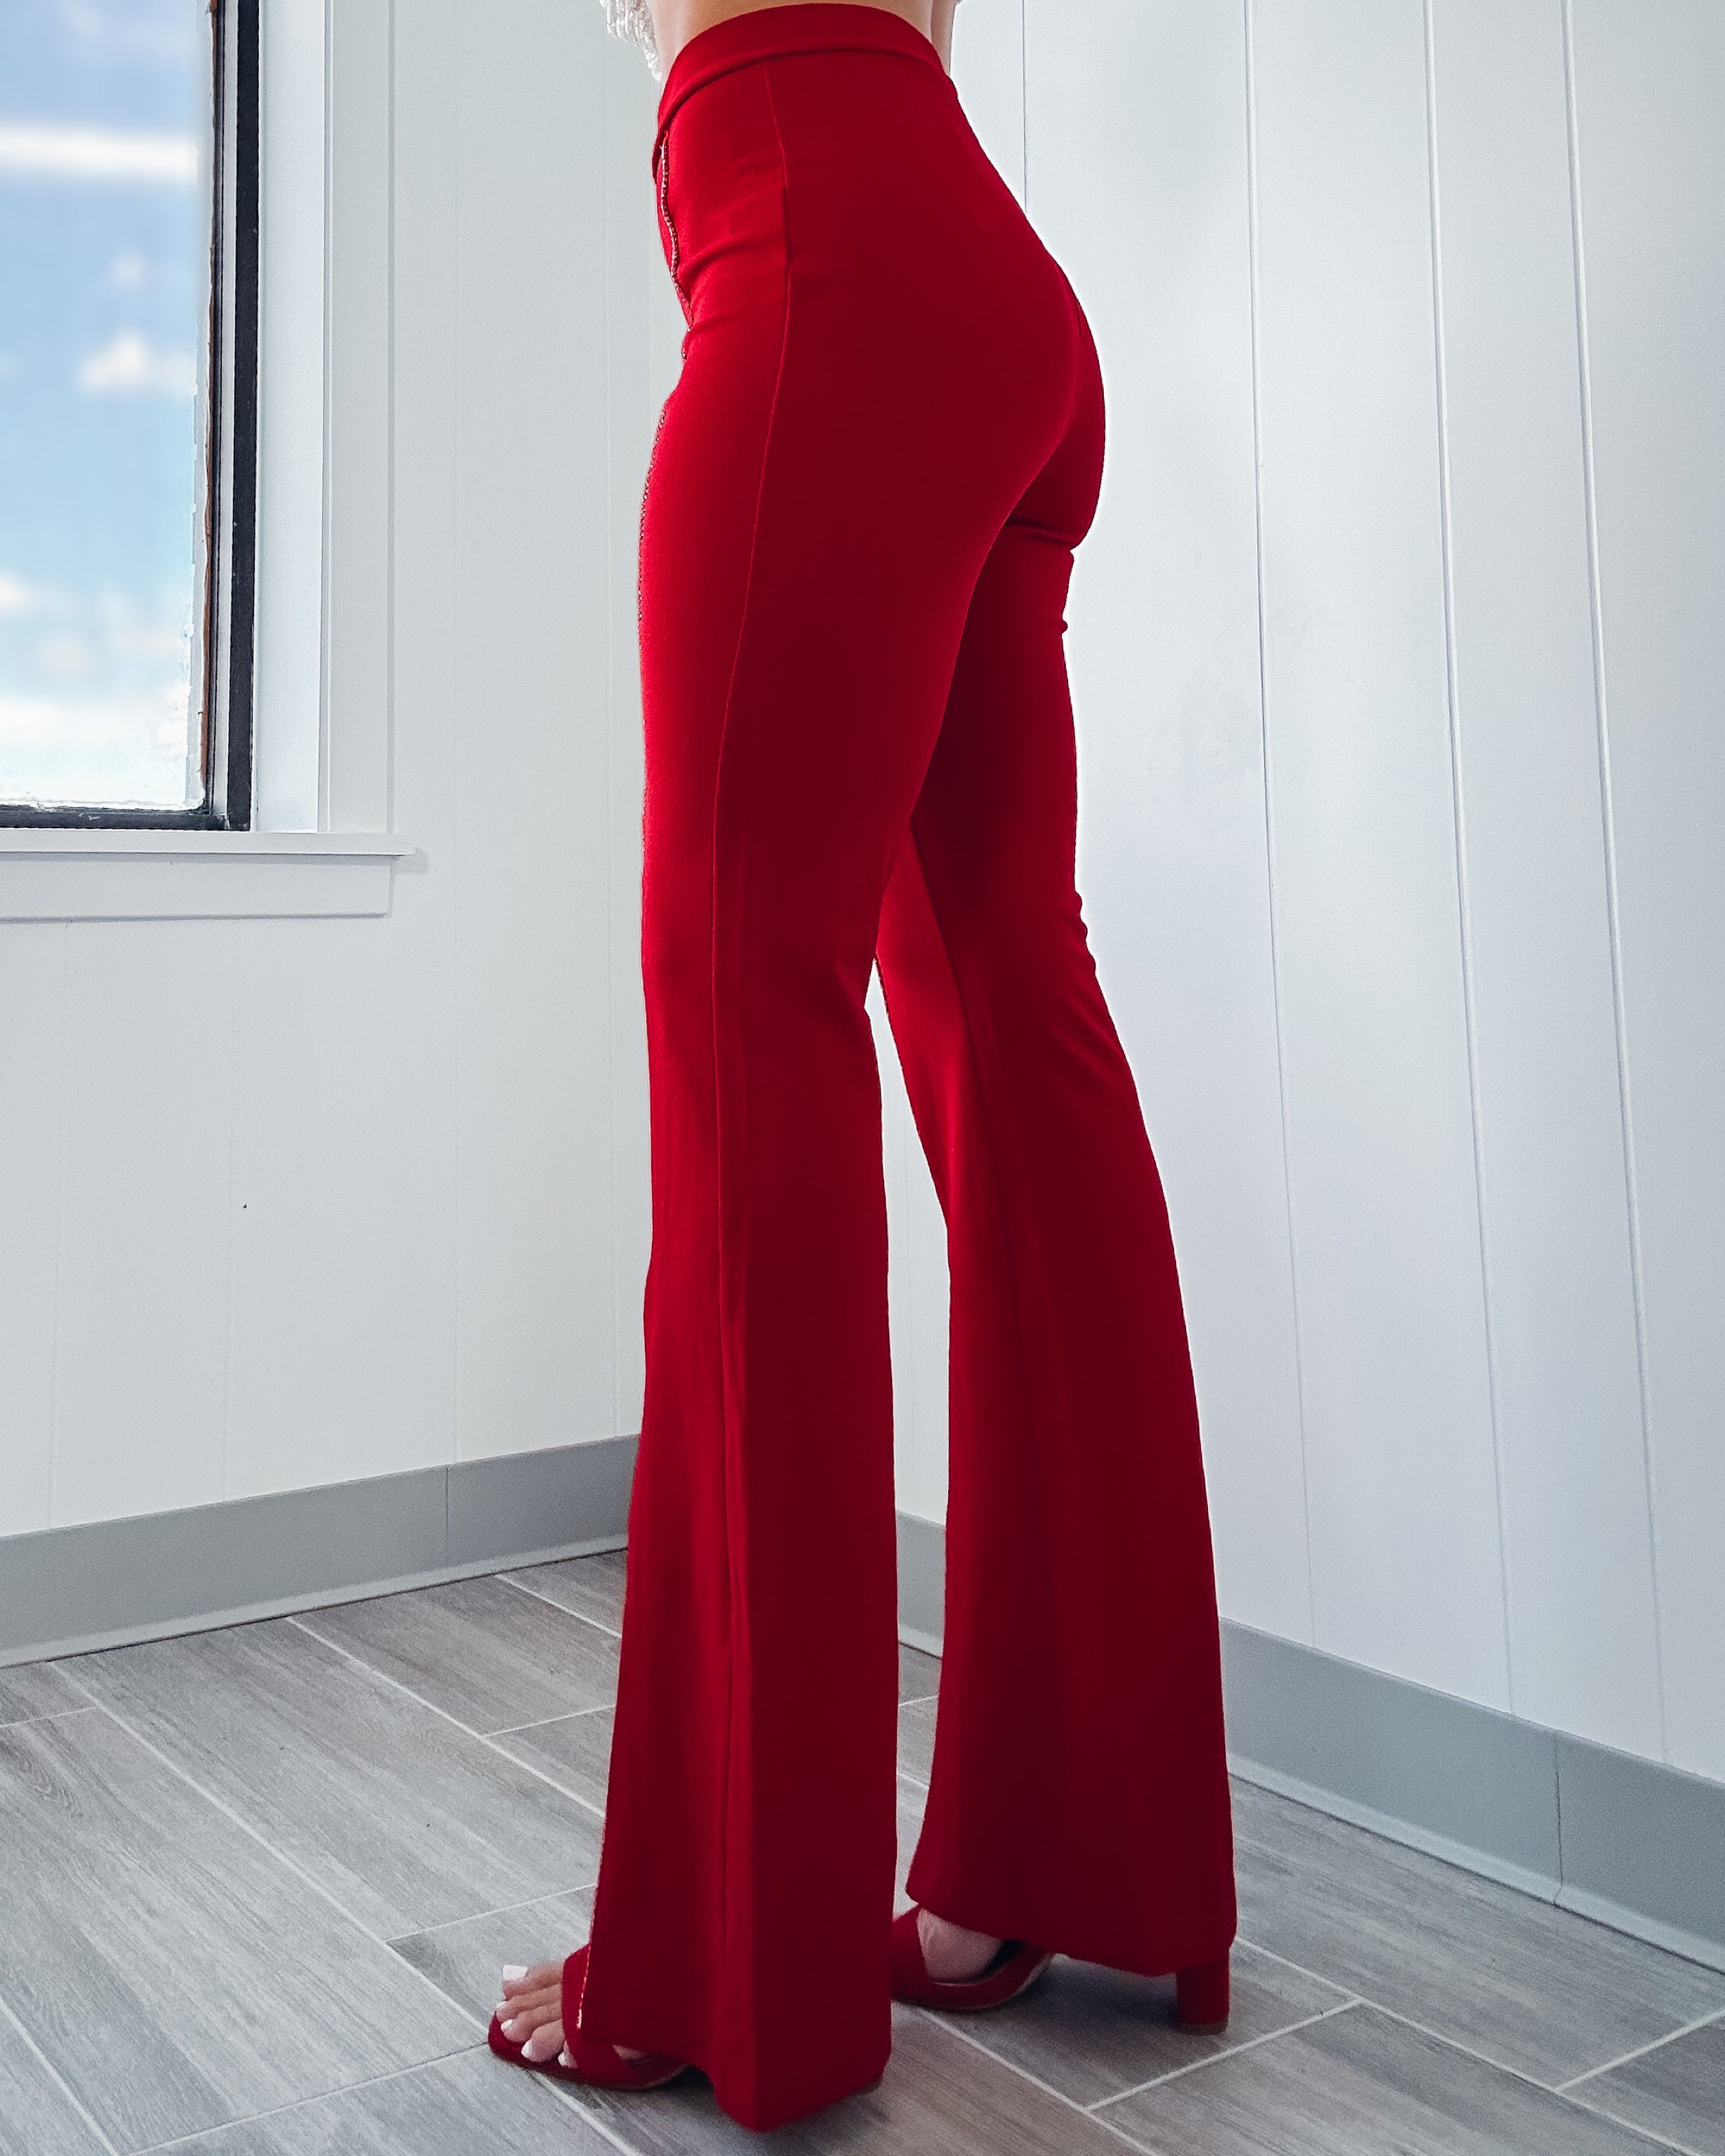 Living In The Moment Rhinestone Slit Pants - Red